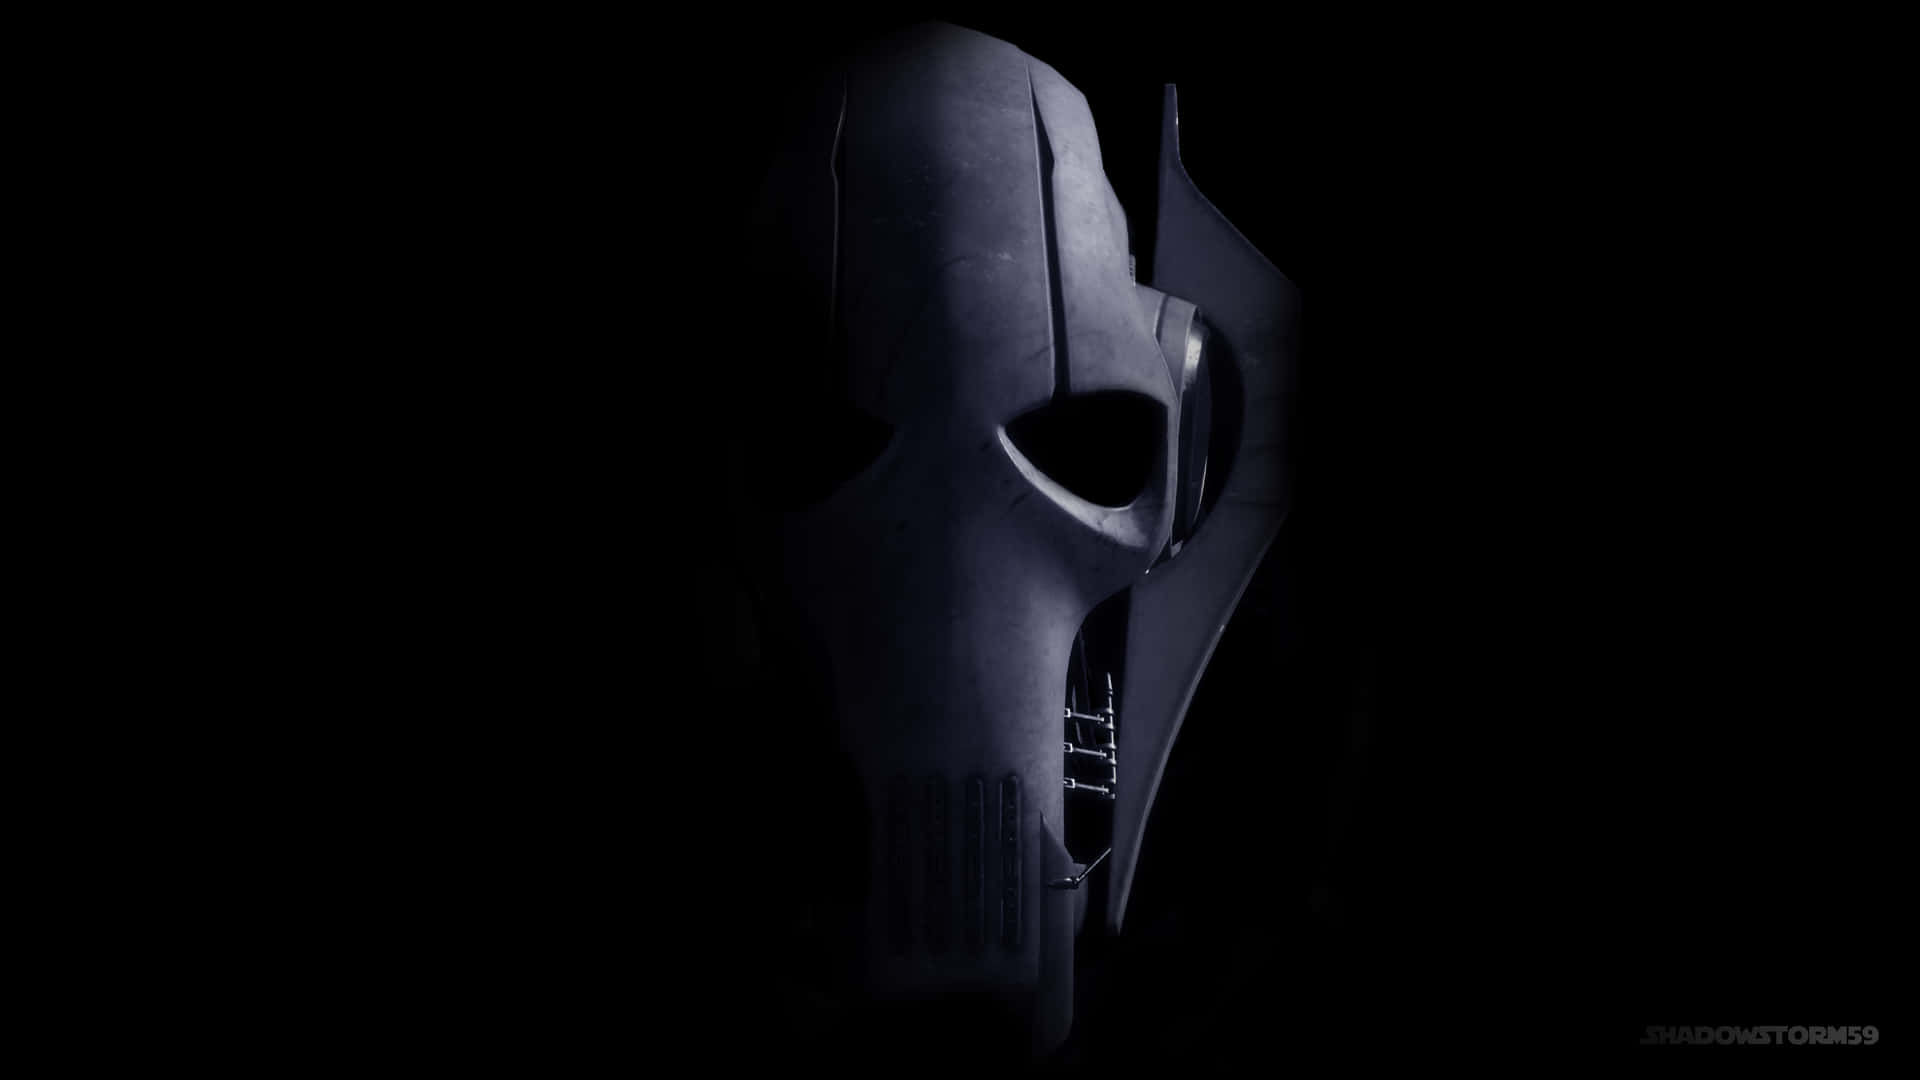 Get Ready For Battle - General Grievous Background